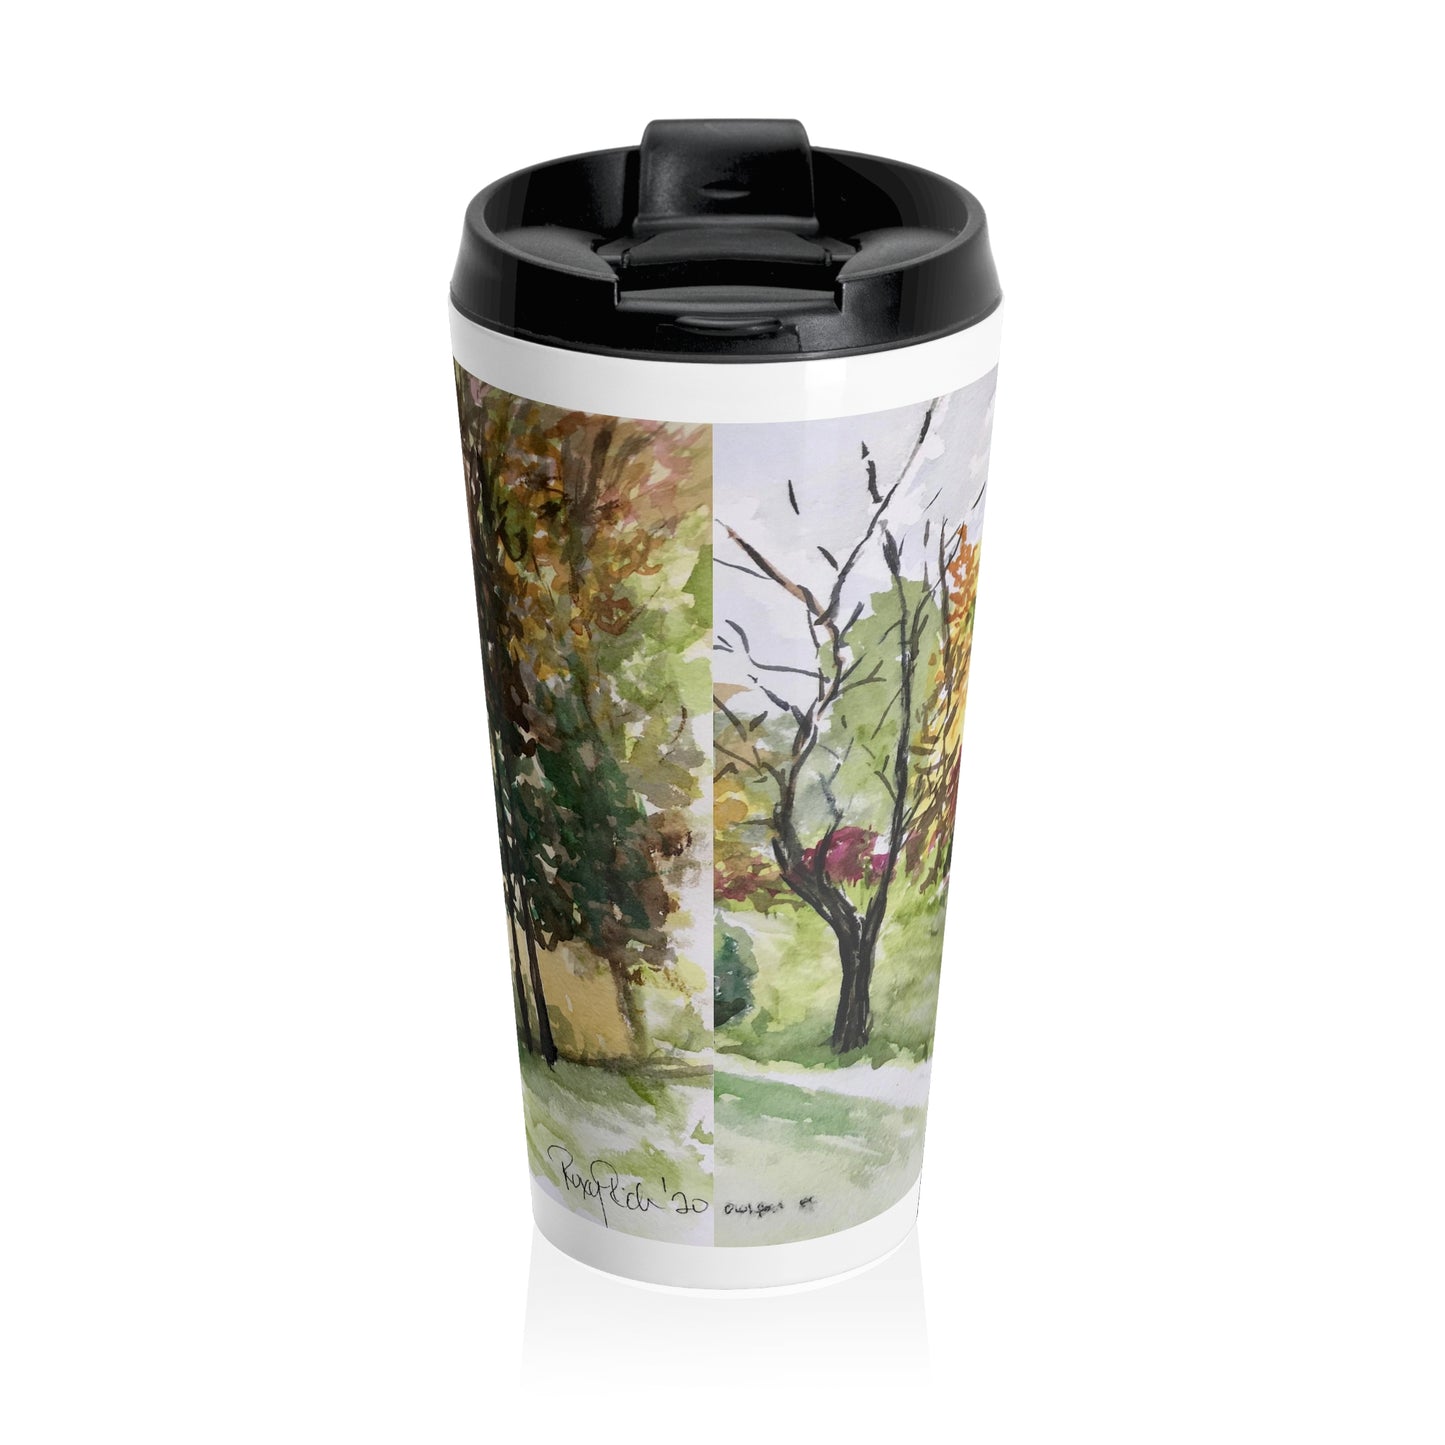 Woodwells Cottage at Owlpen Manor Cotswolds Stainless Steel Travel Mug